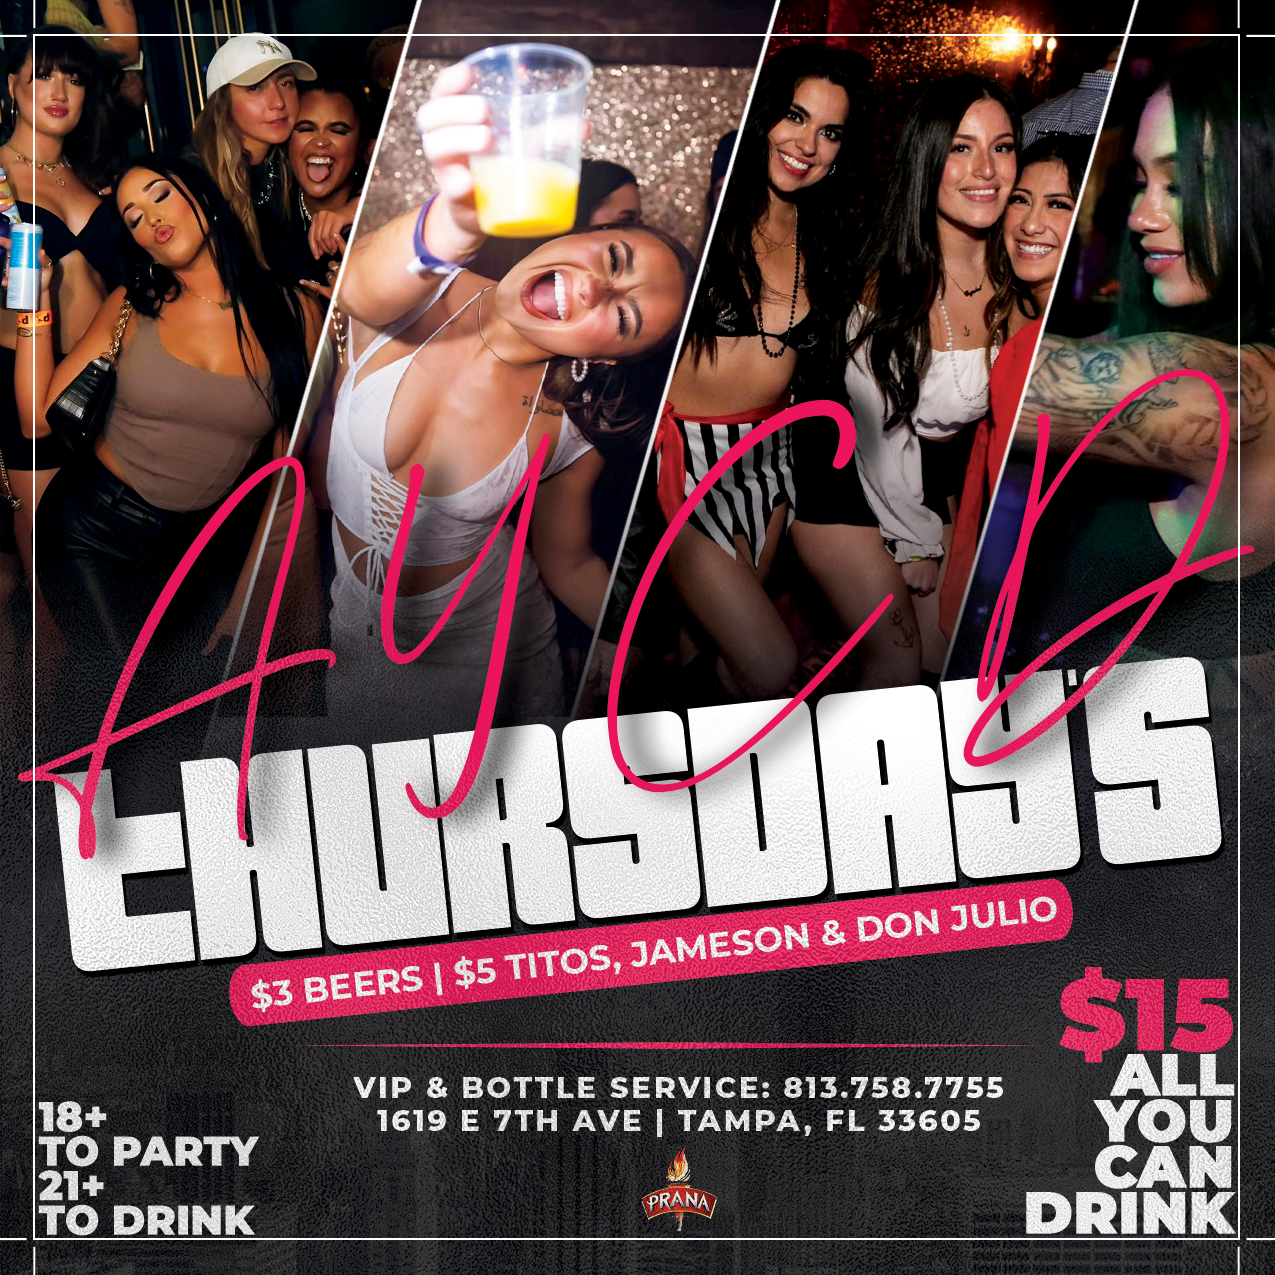 All You Can Drink Flyer For Club Prana Thursday Nights In Ybor City Tampa